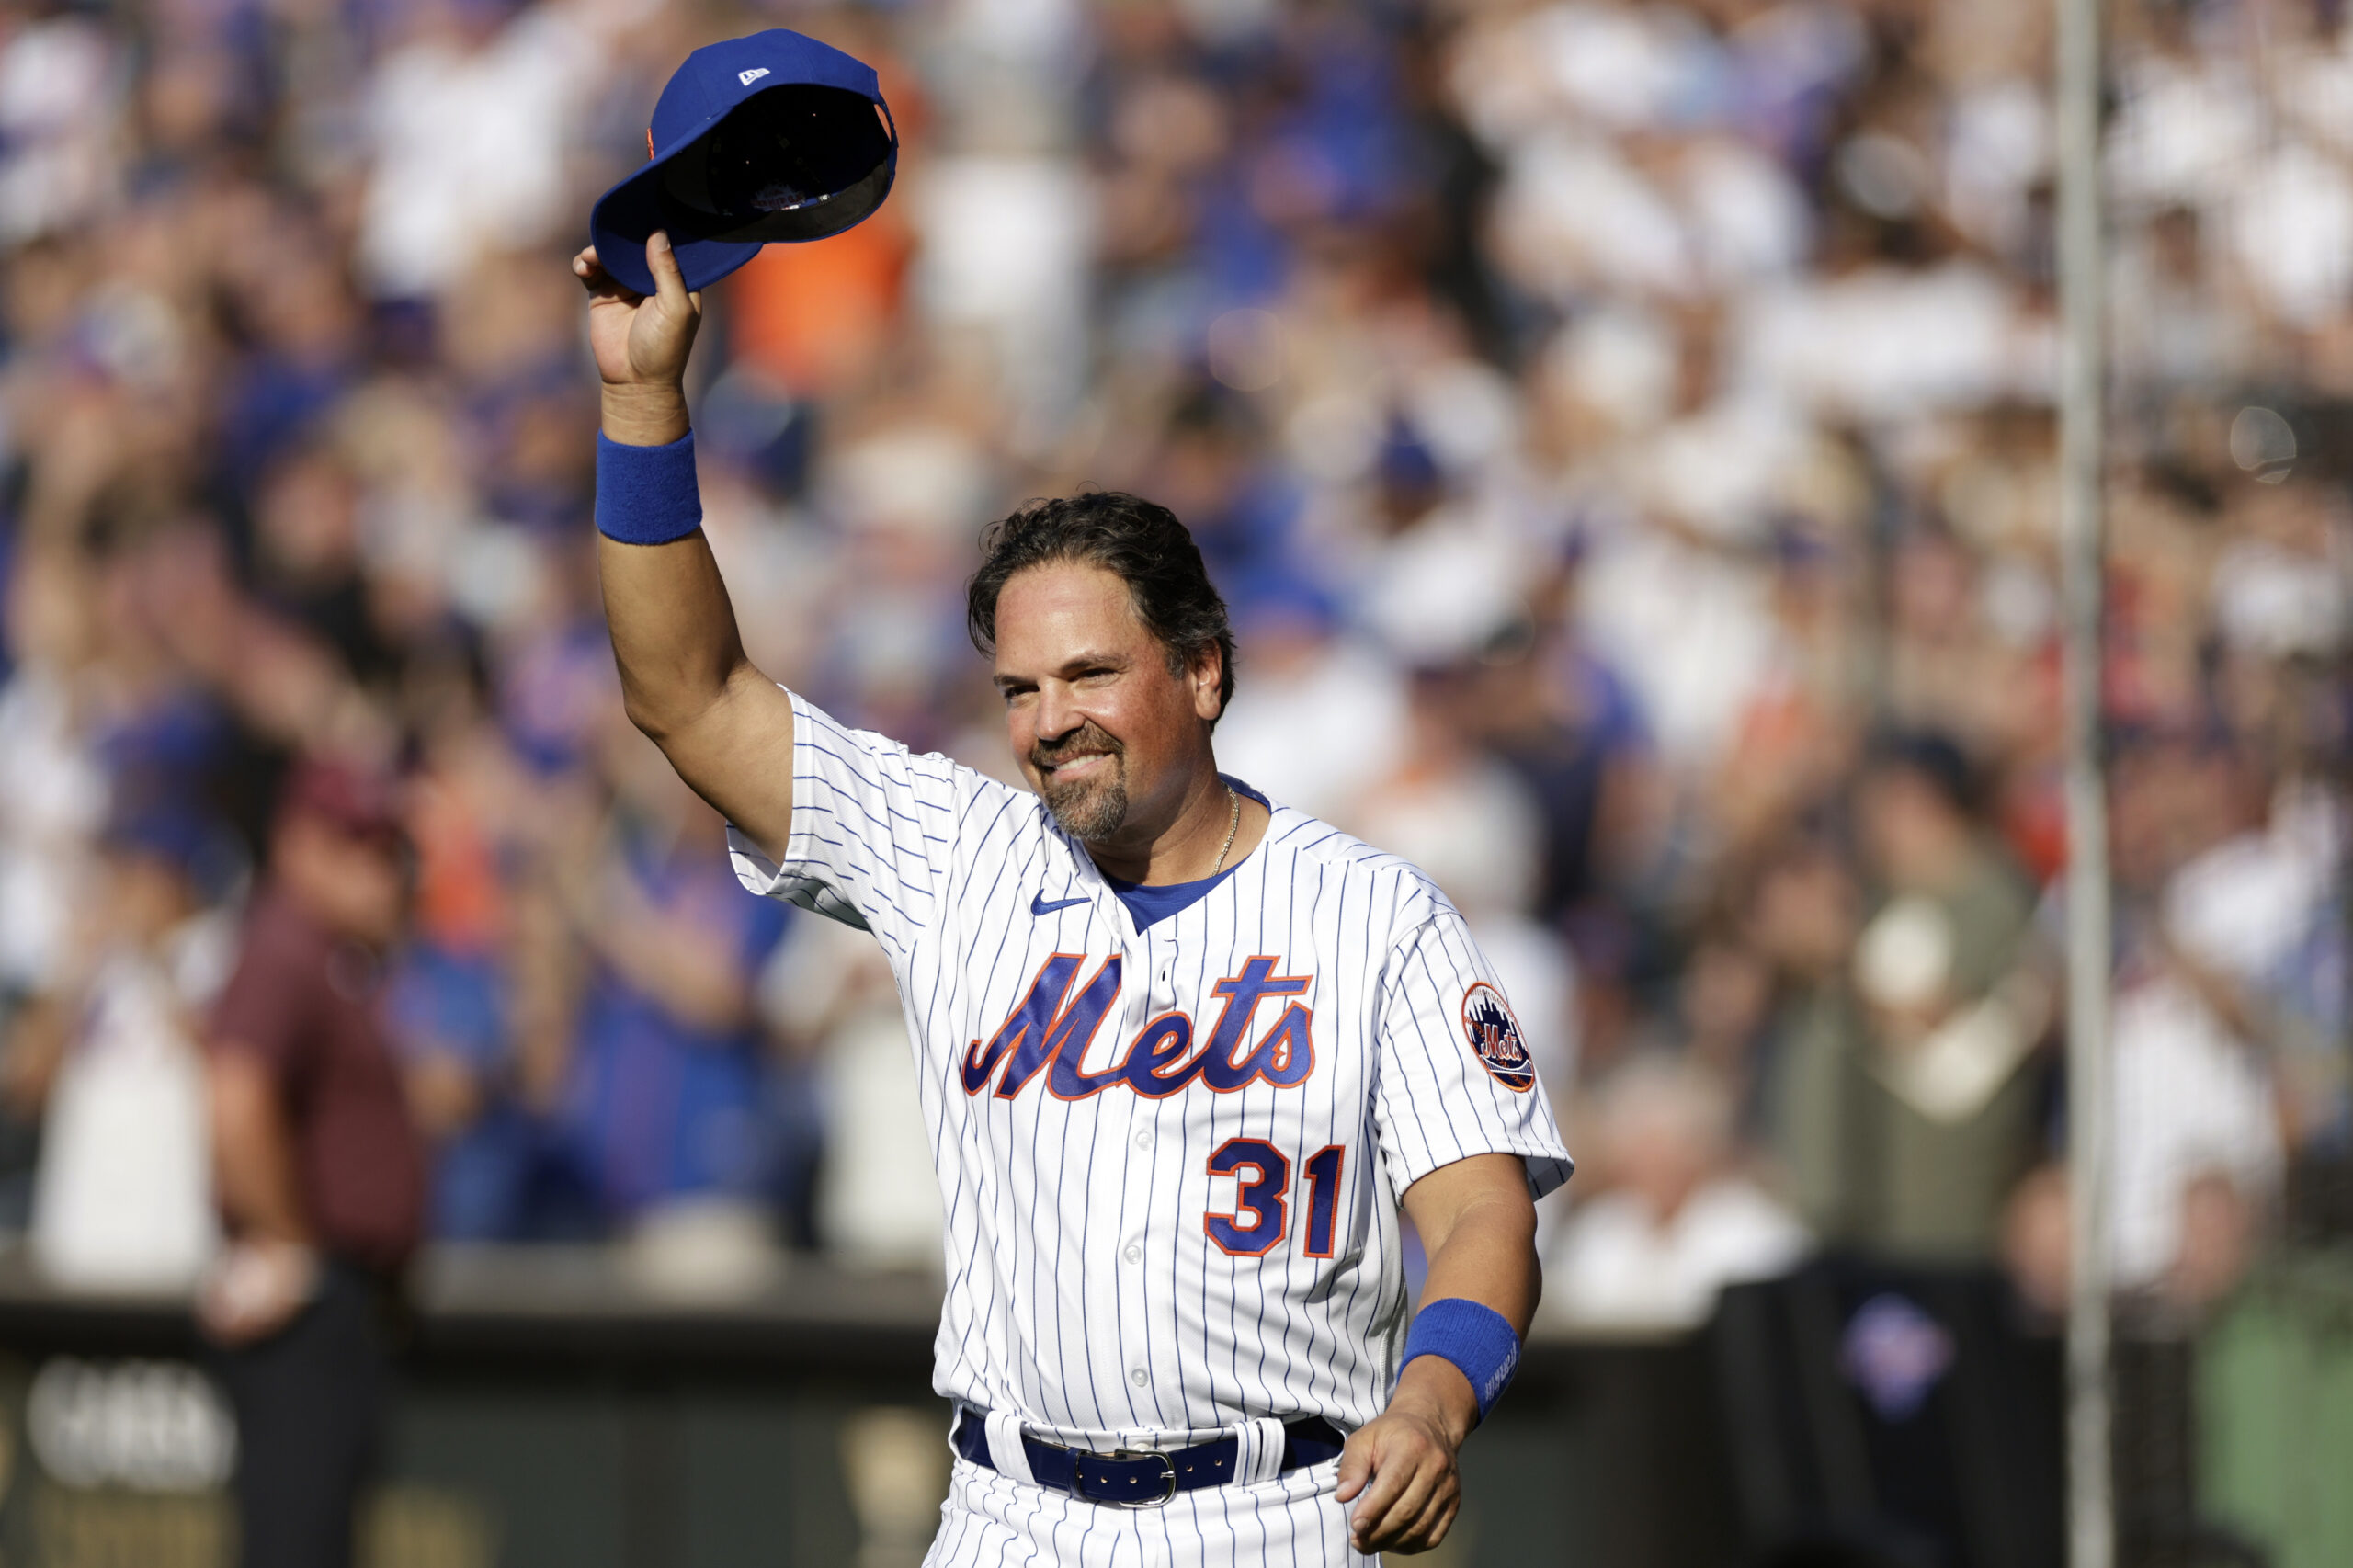 Mike Piazza on Jacob deGrom leaving the Mets and why he got tear-gassed for ‘Special Forces’